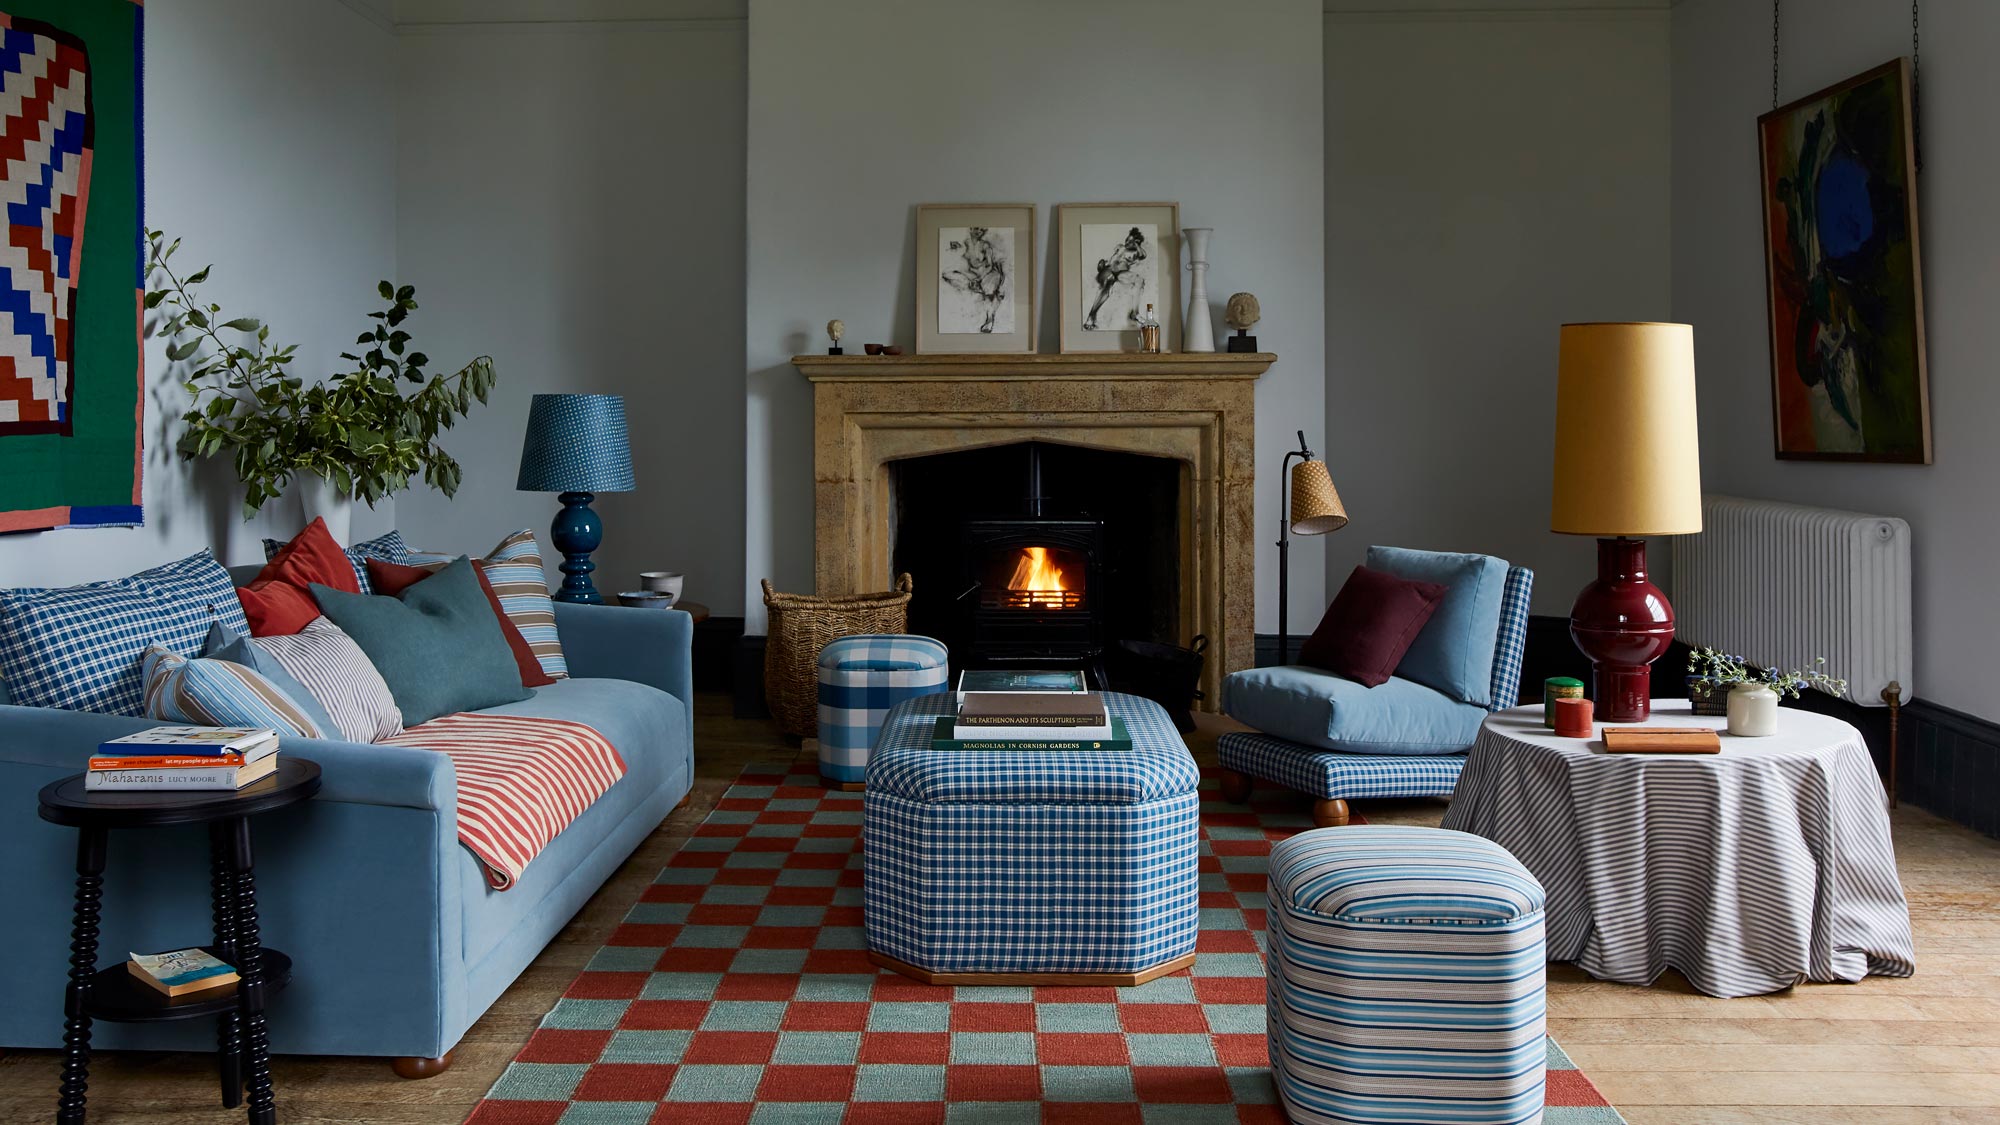 A living room with a blue sofa armchair and ottoman in front of the fireplace